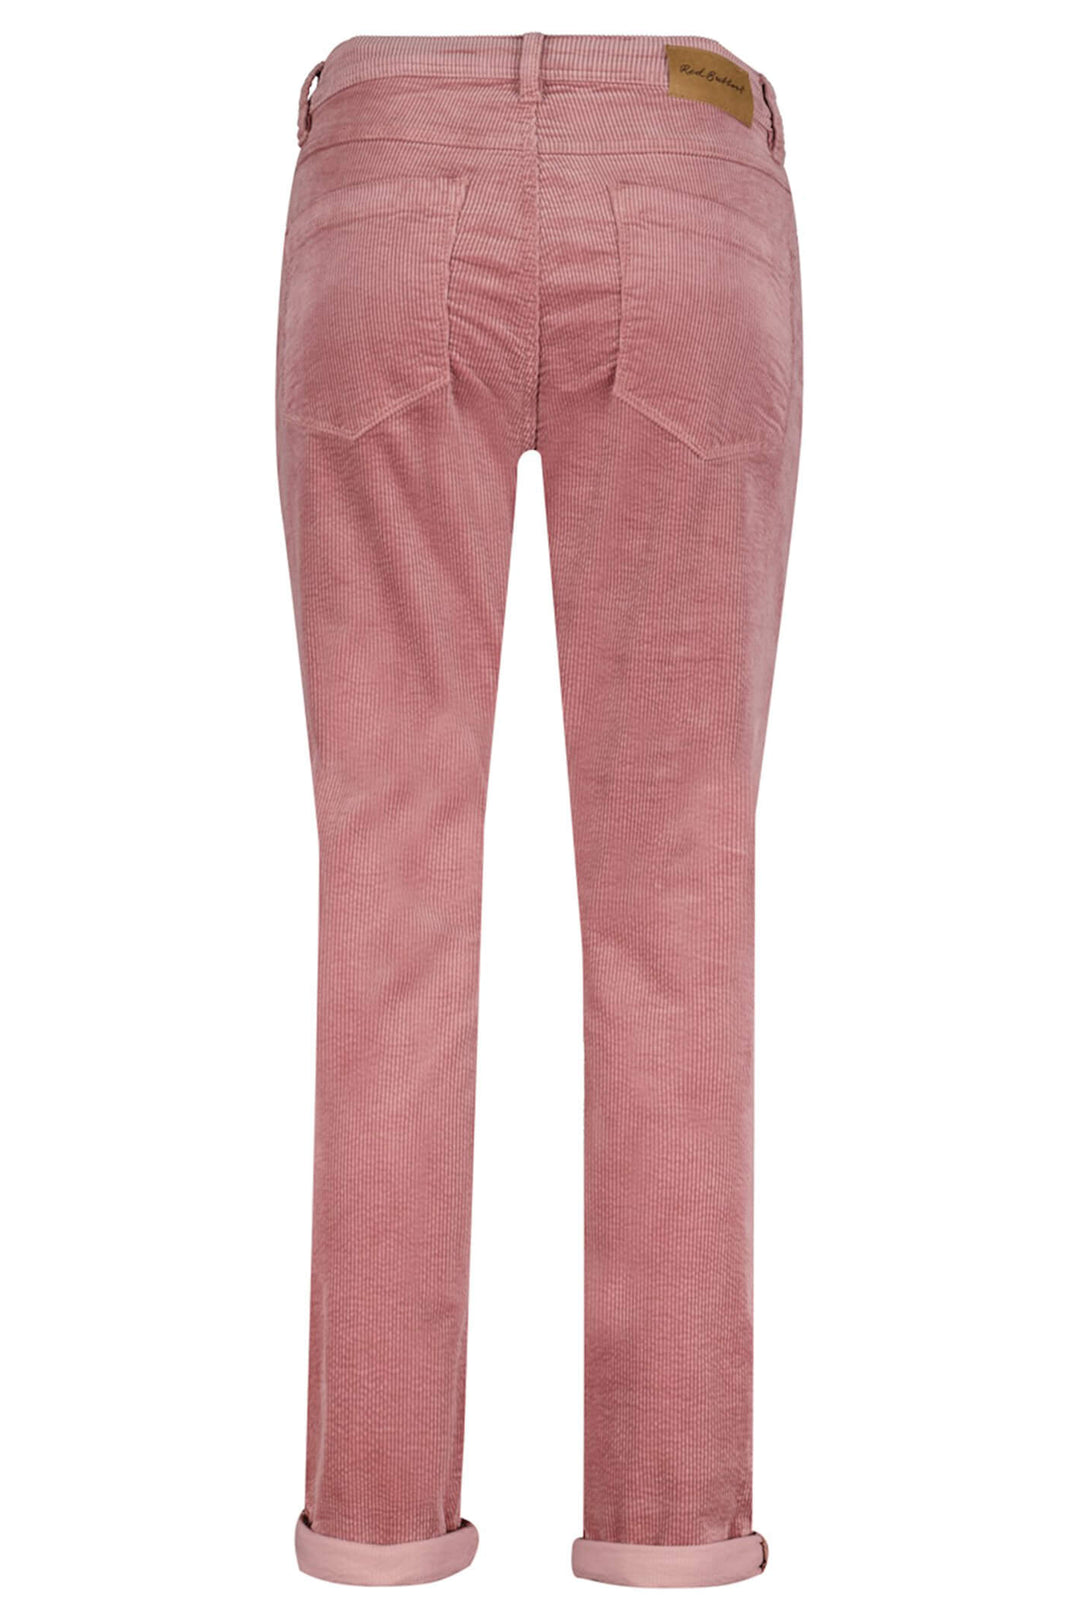 Red Button SRB4084 Sienna Wild Rose Pink Corduroy Trousers - Olivia Grace Fashion